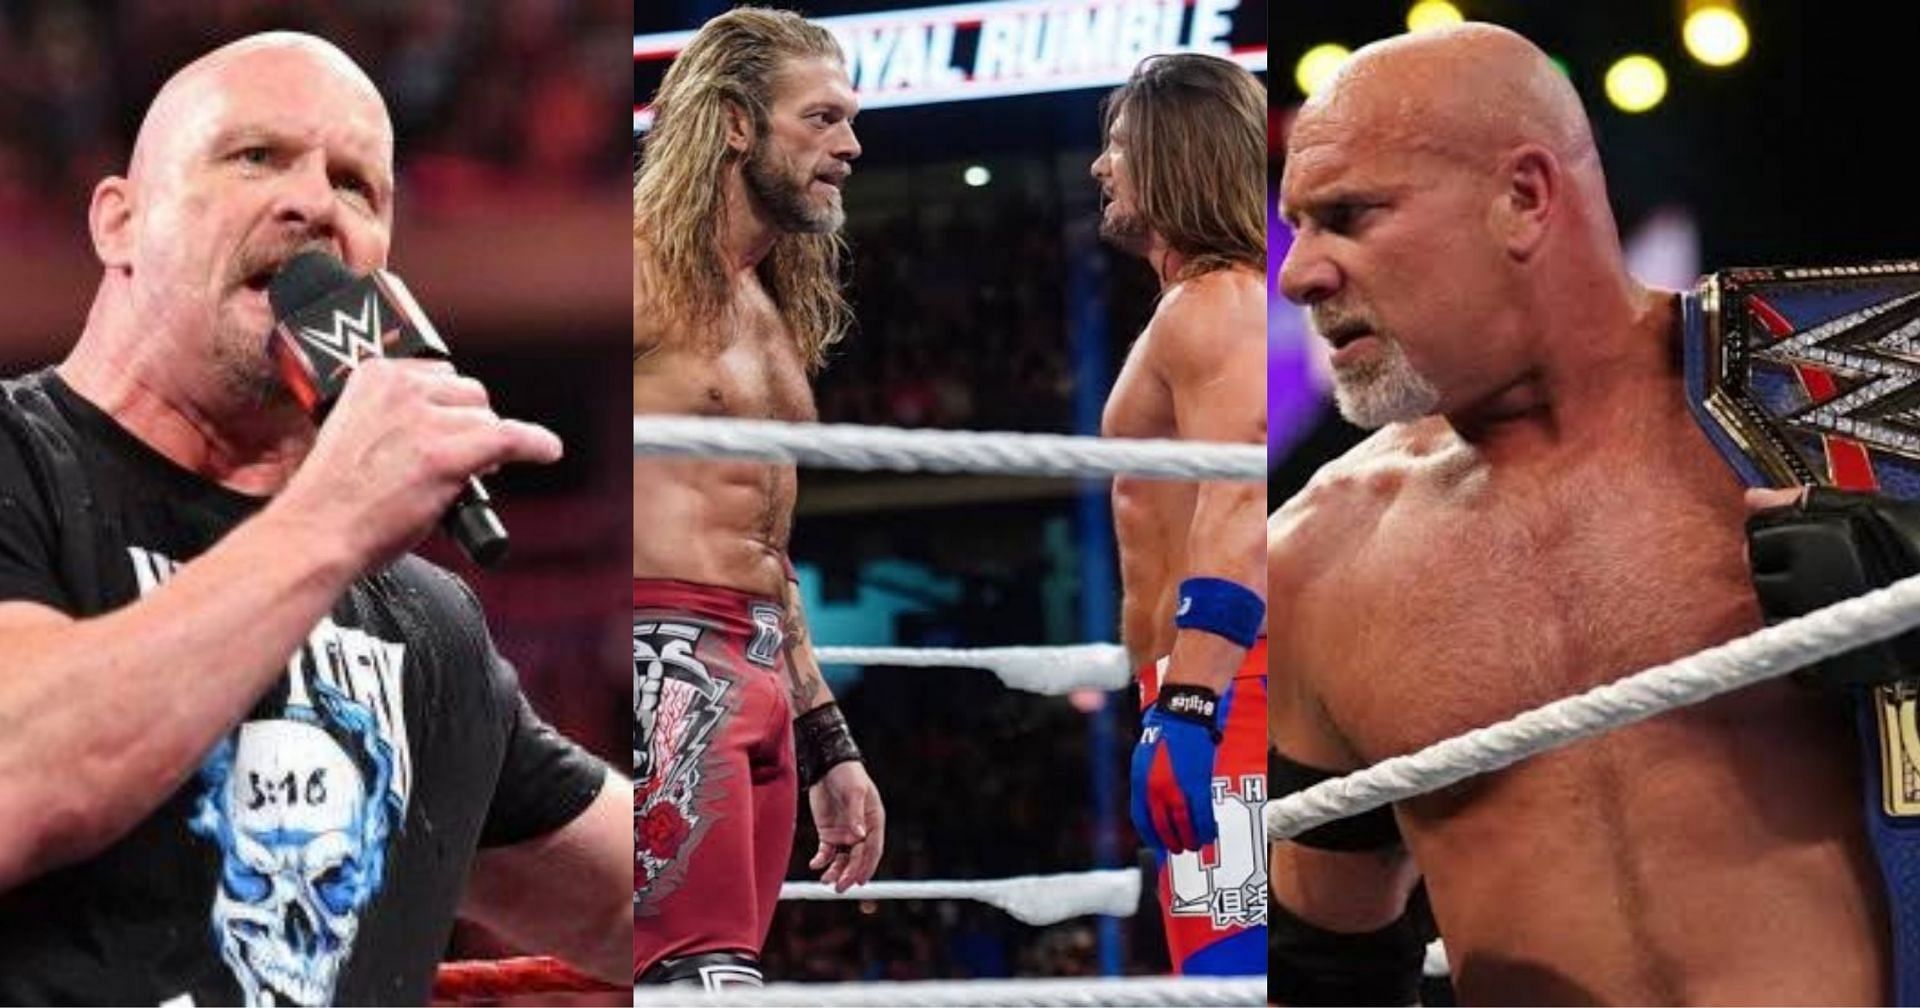 WWE Elimination Chamber 2022 Could Feature Many Surprises